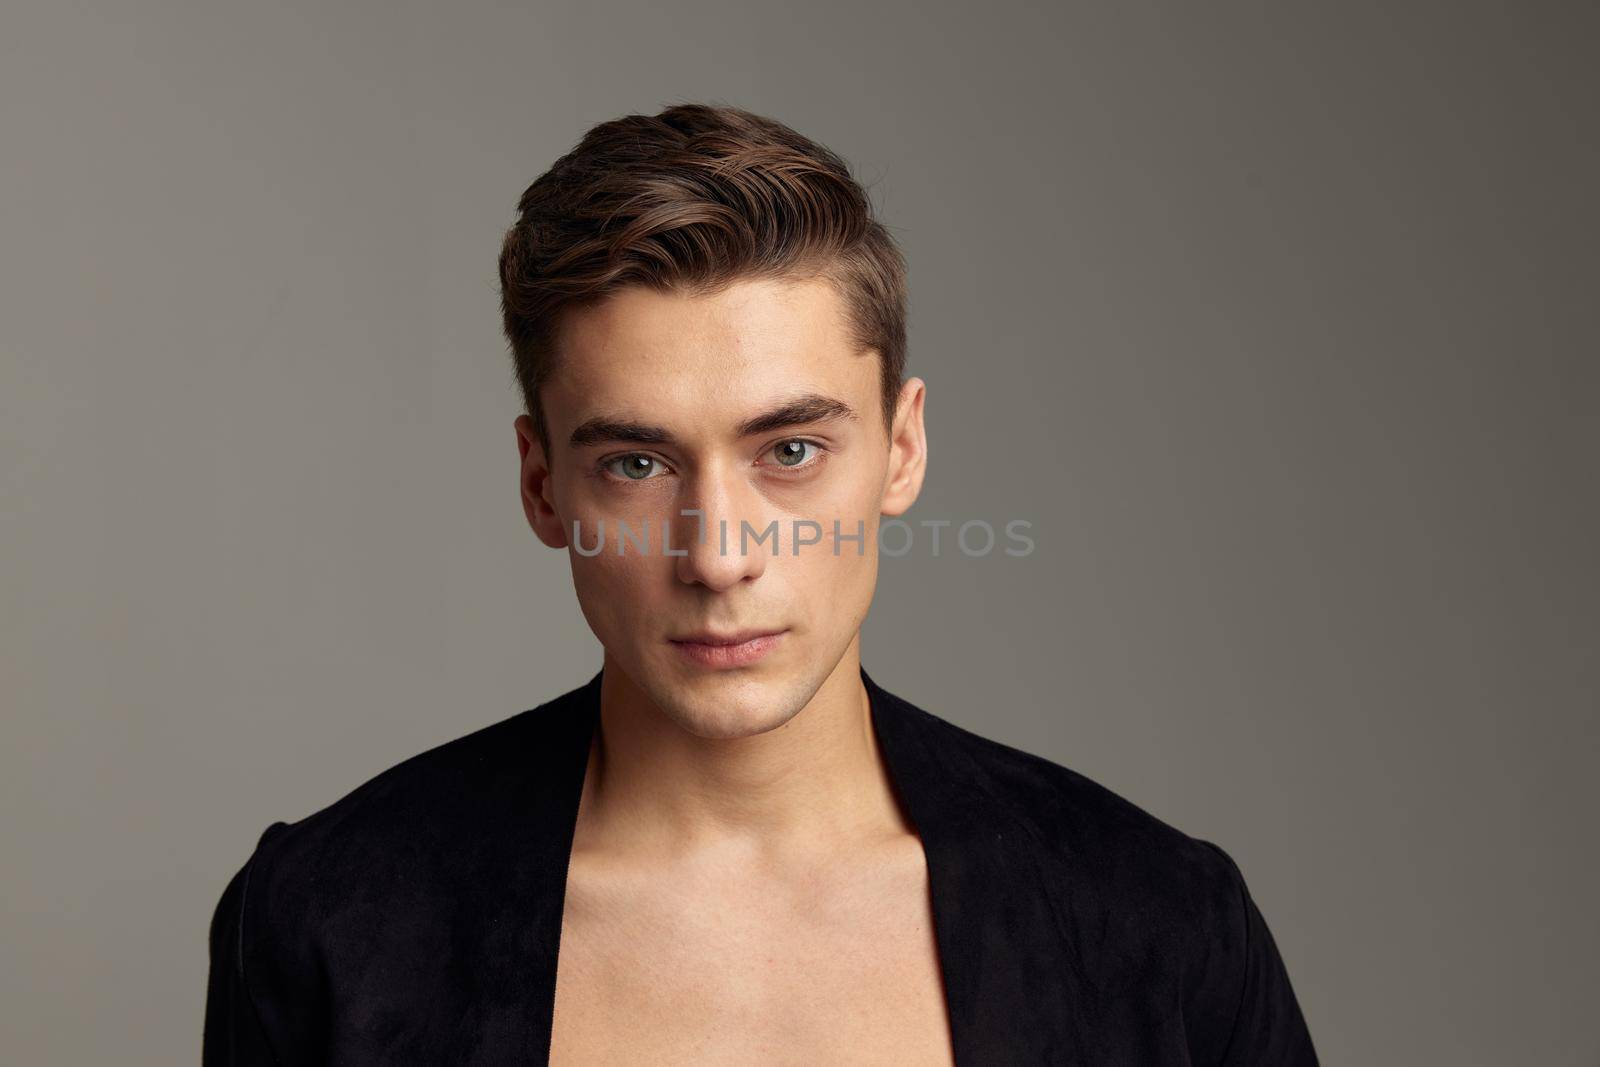 Handsome man fashionable hairstyle closeup attractiveness gray background by SHOTPRIME